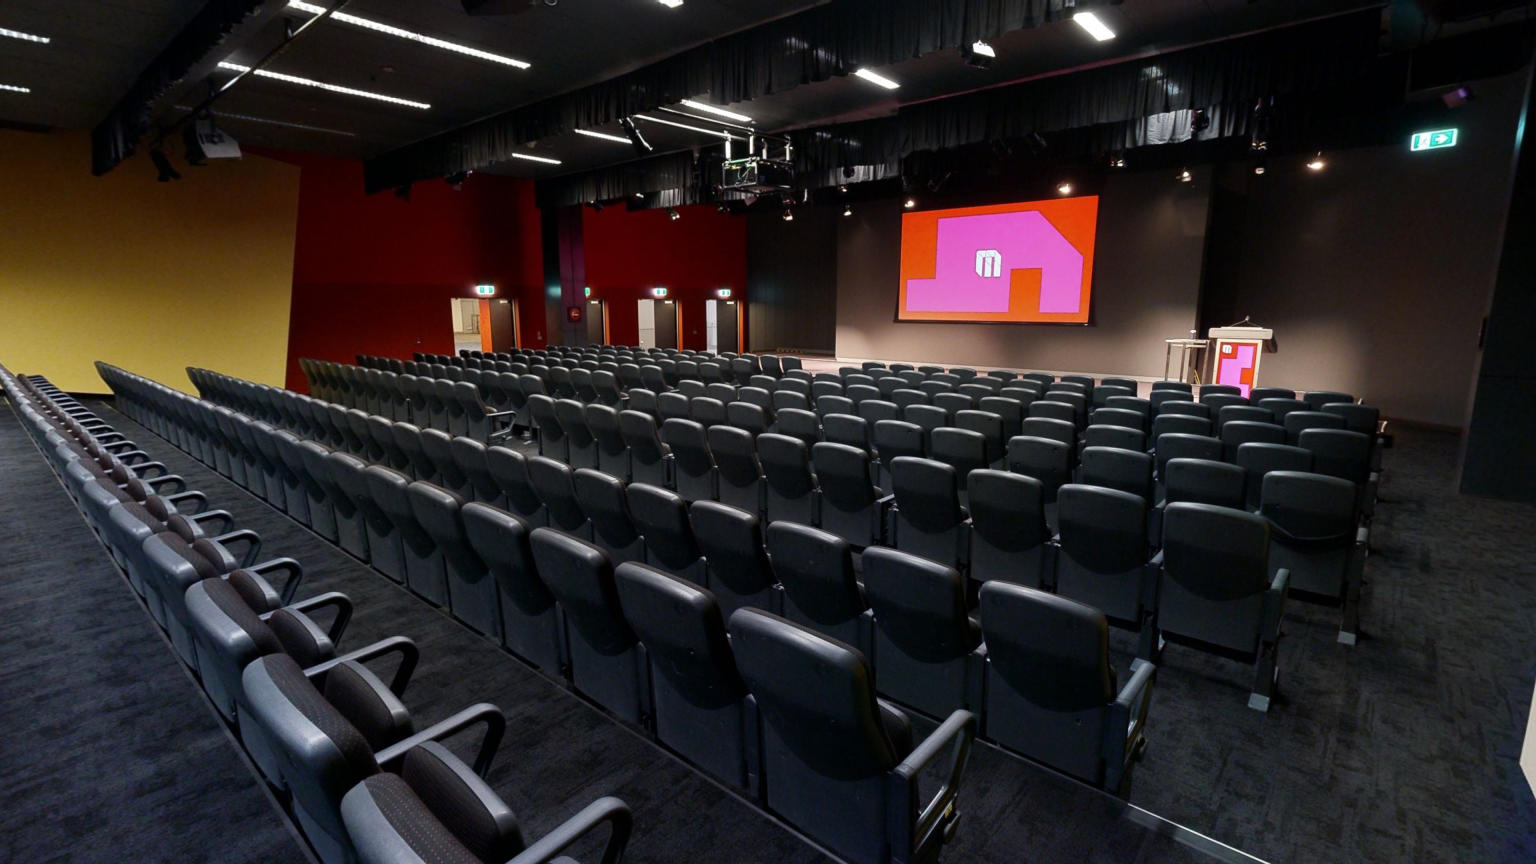 An expansive auditorium featuring multiple rows of seating and a prominent projector screen for presentations and events.